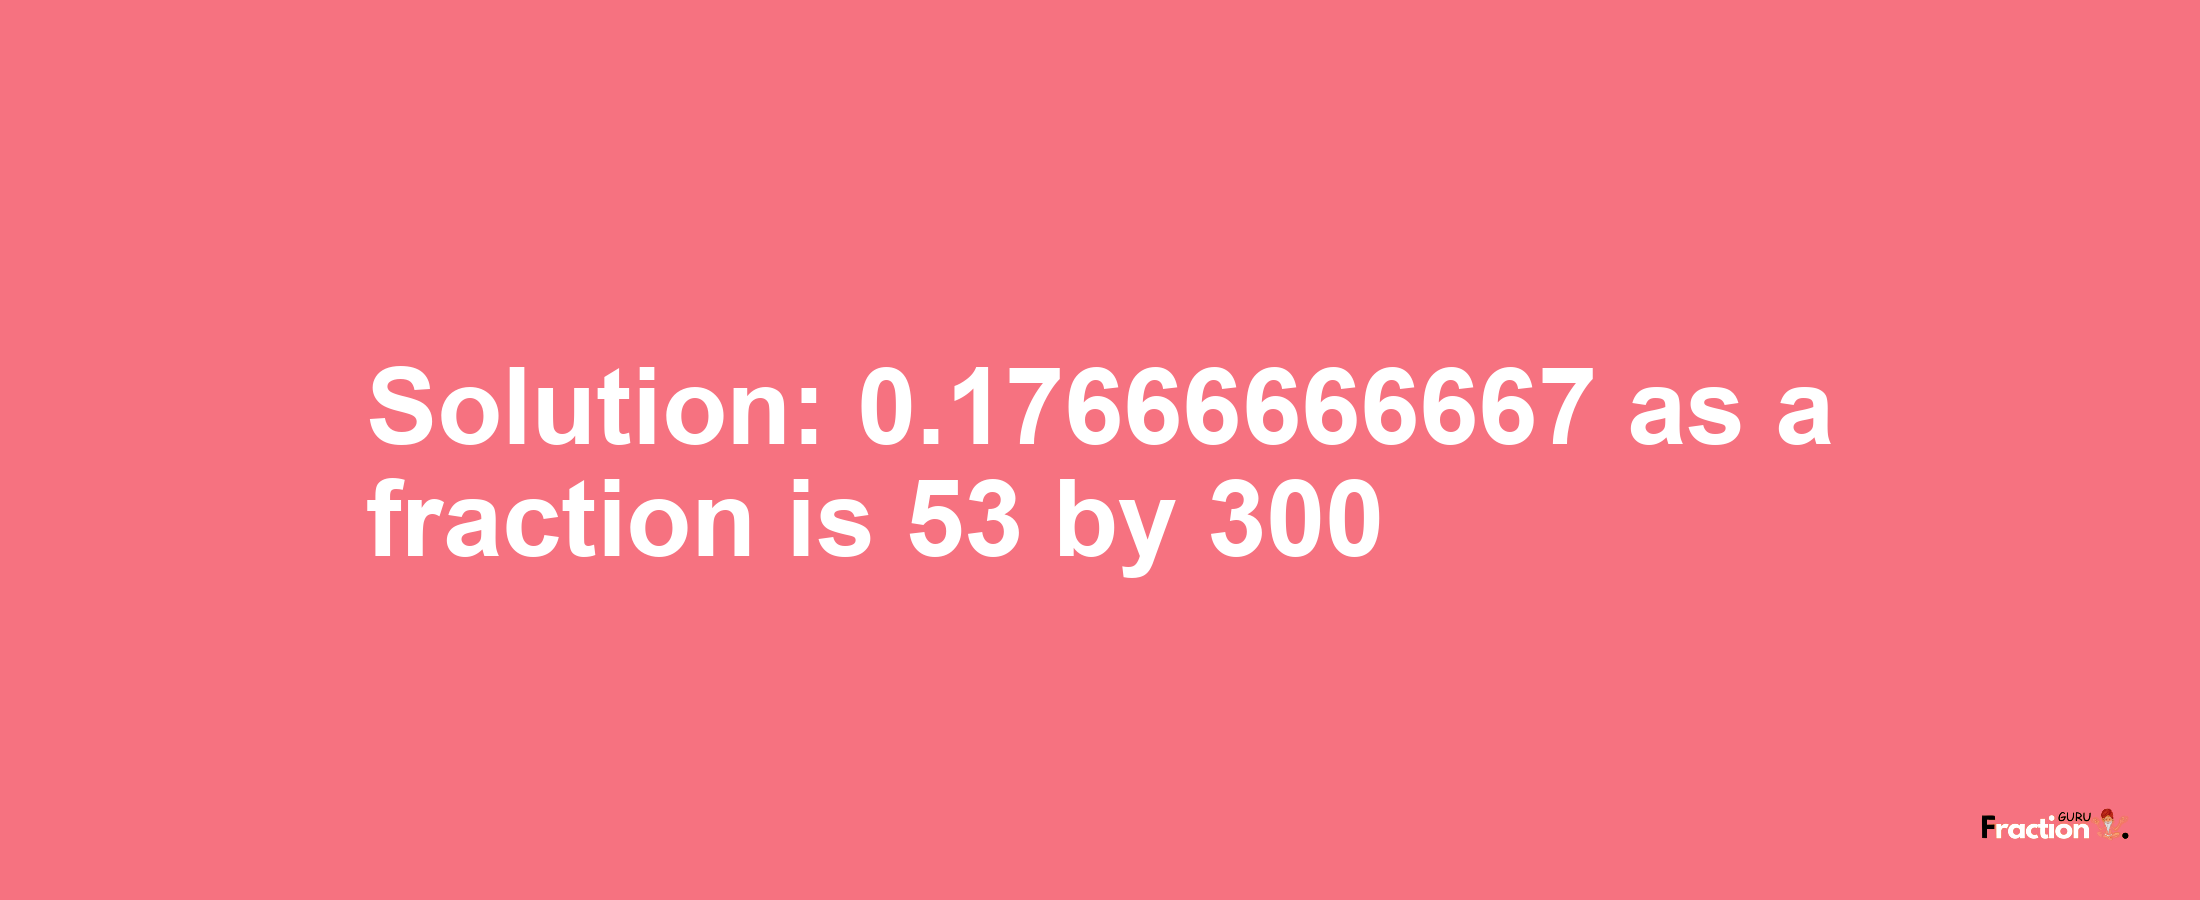 Solution:0.17666666667 as a fraction is 53/300